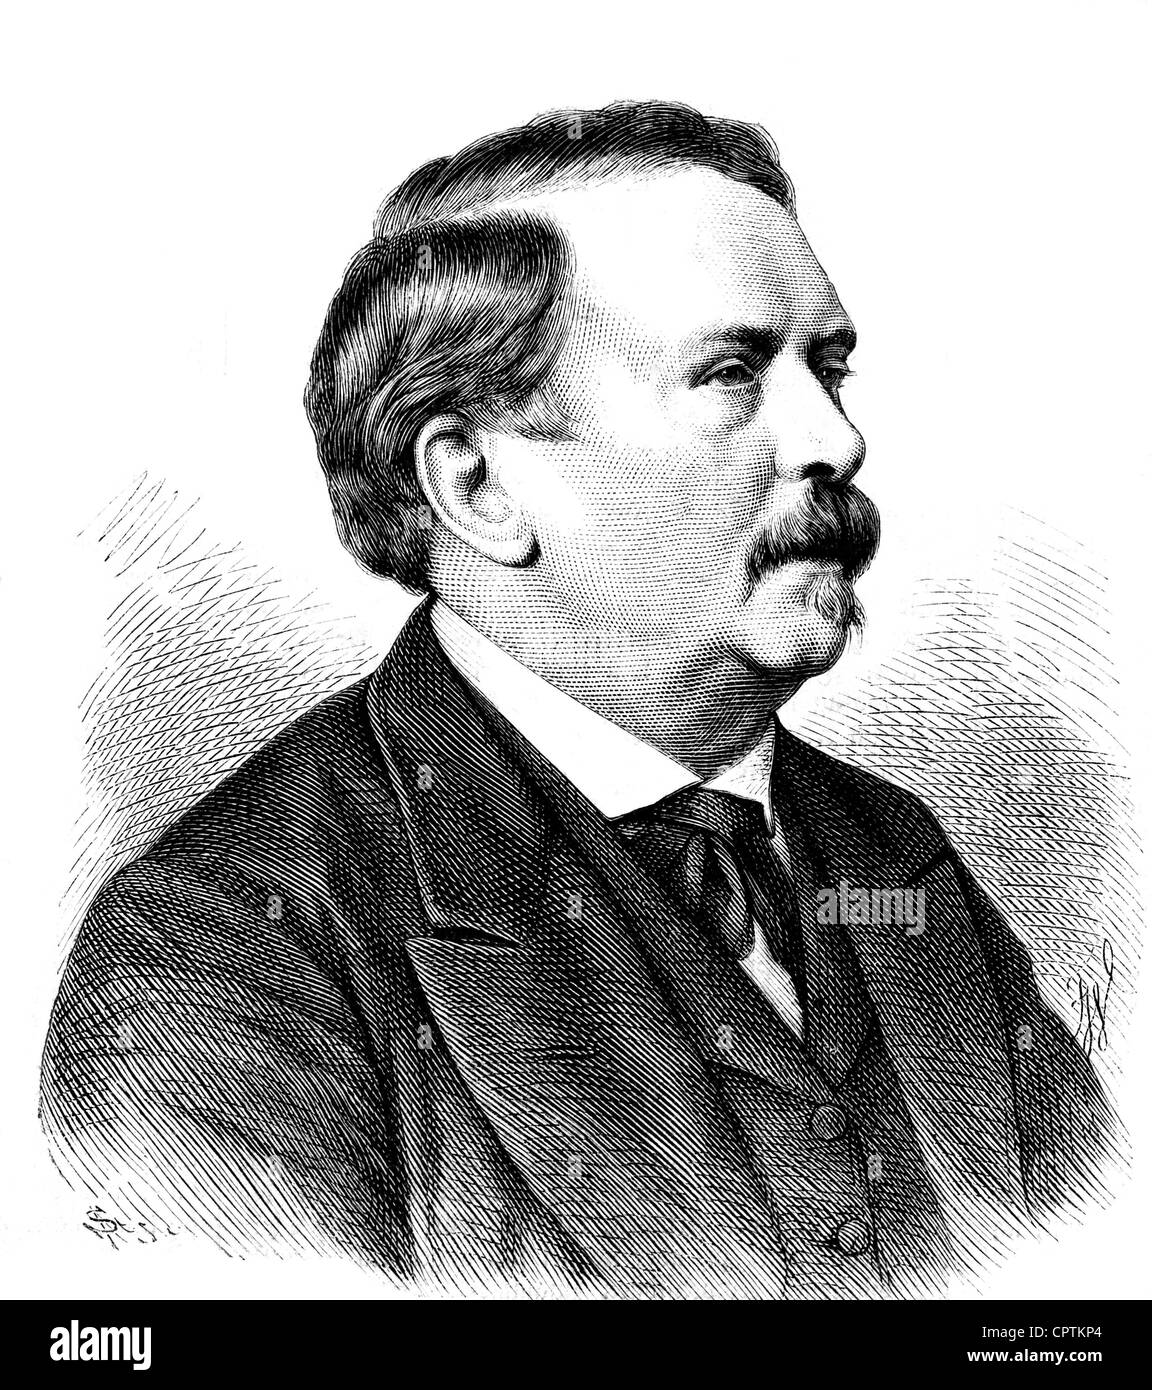 Mueller, Otto, 1.6.1816 - 7.8.1894, German author / writer, portrait, semiprofile, based on photograph by F. Weiss, wood engraving, 1874, Stock Photo